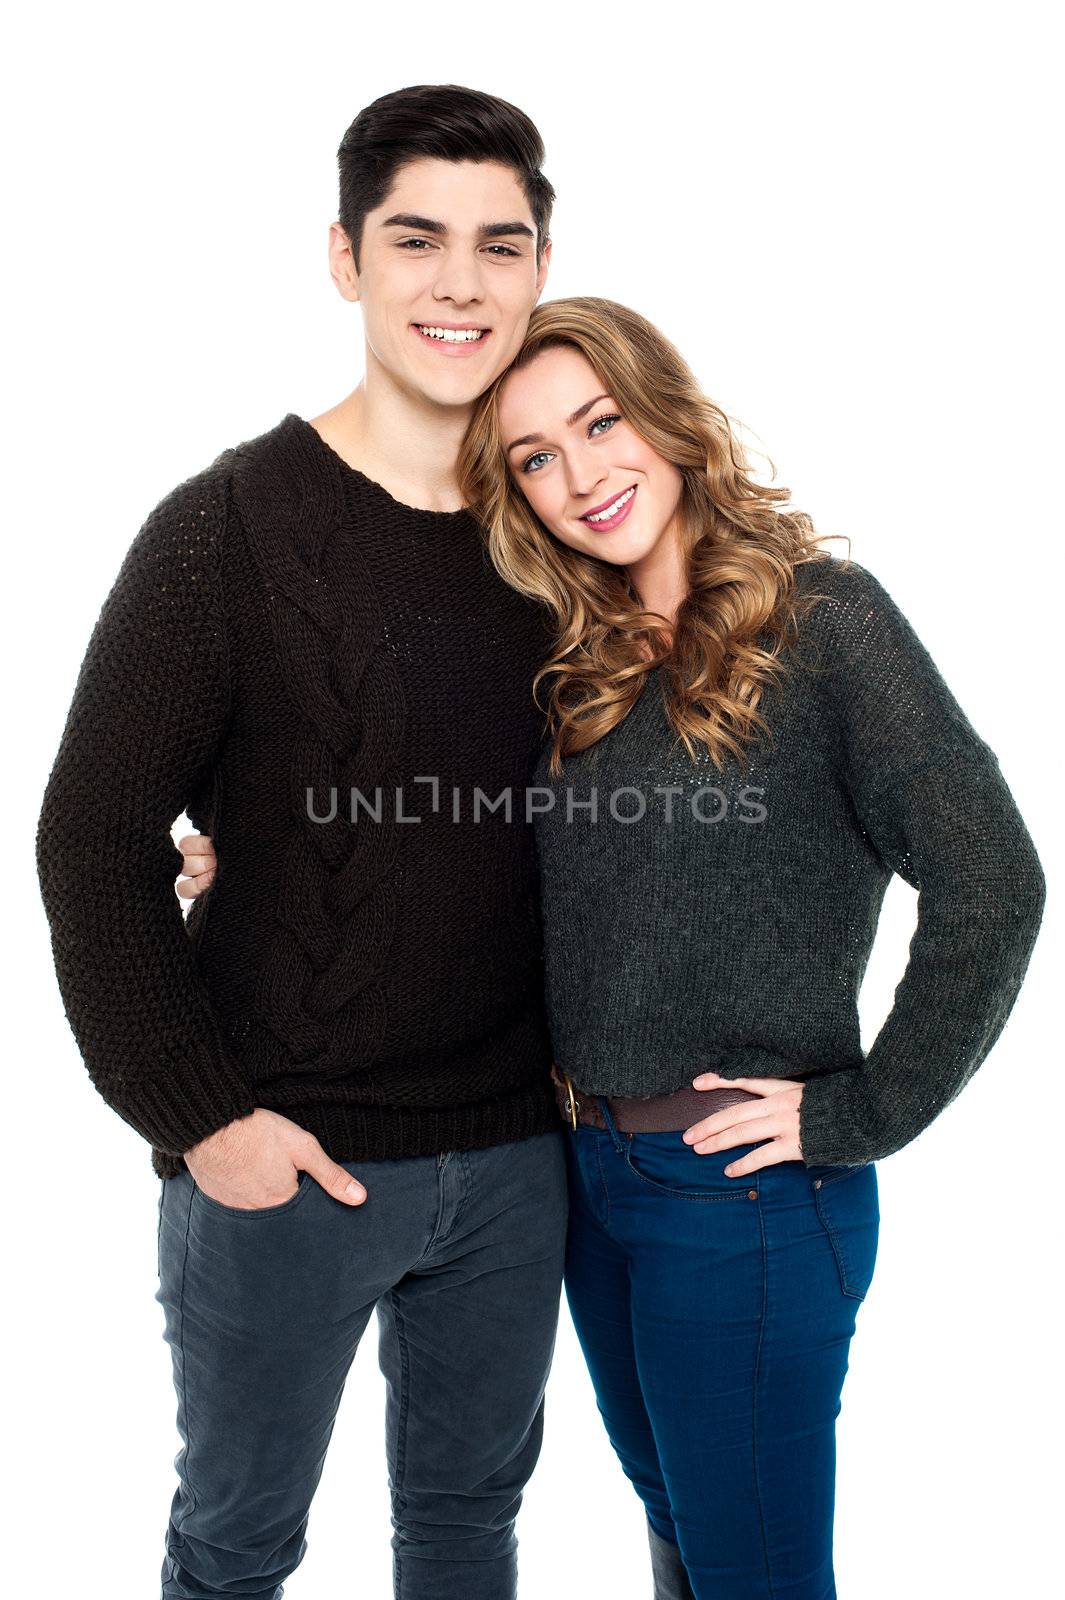 Fashionable young couple in warm clothing embracing each other.